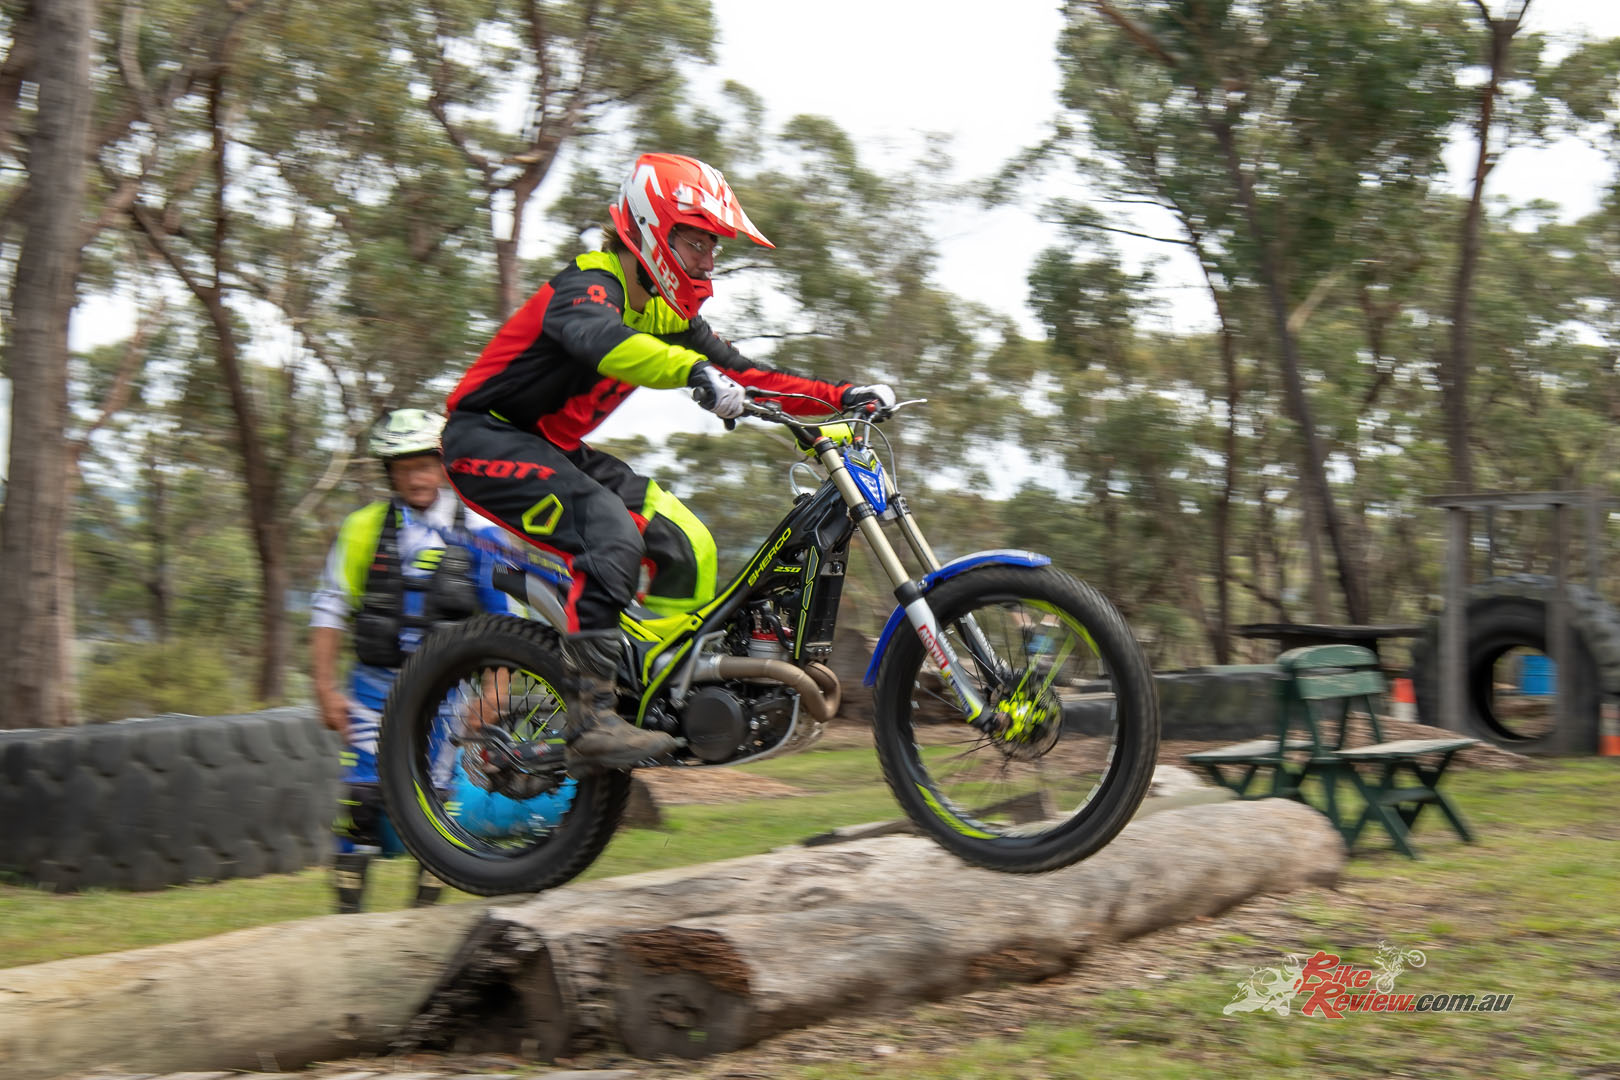 Zane said that one quick strike of the kick-starter and the Sherco burst into life with ease!